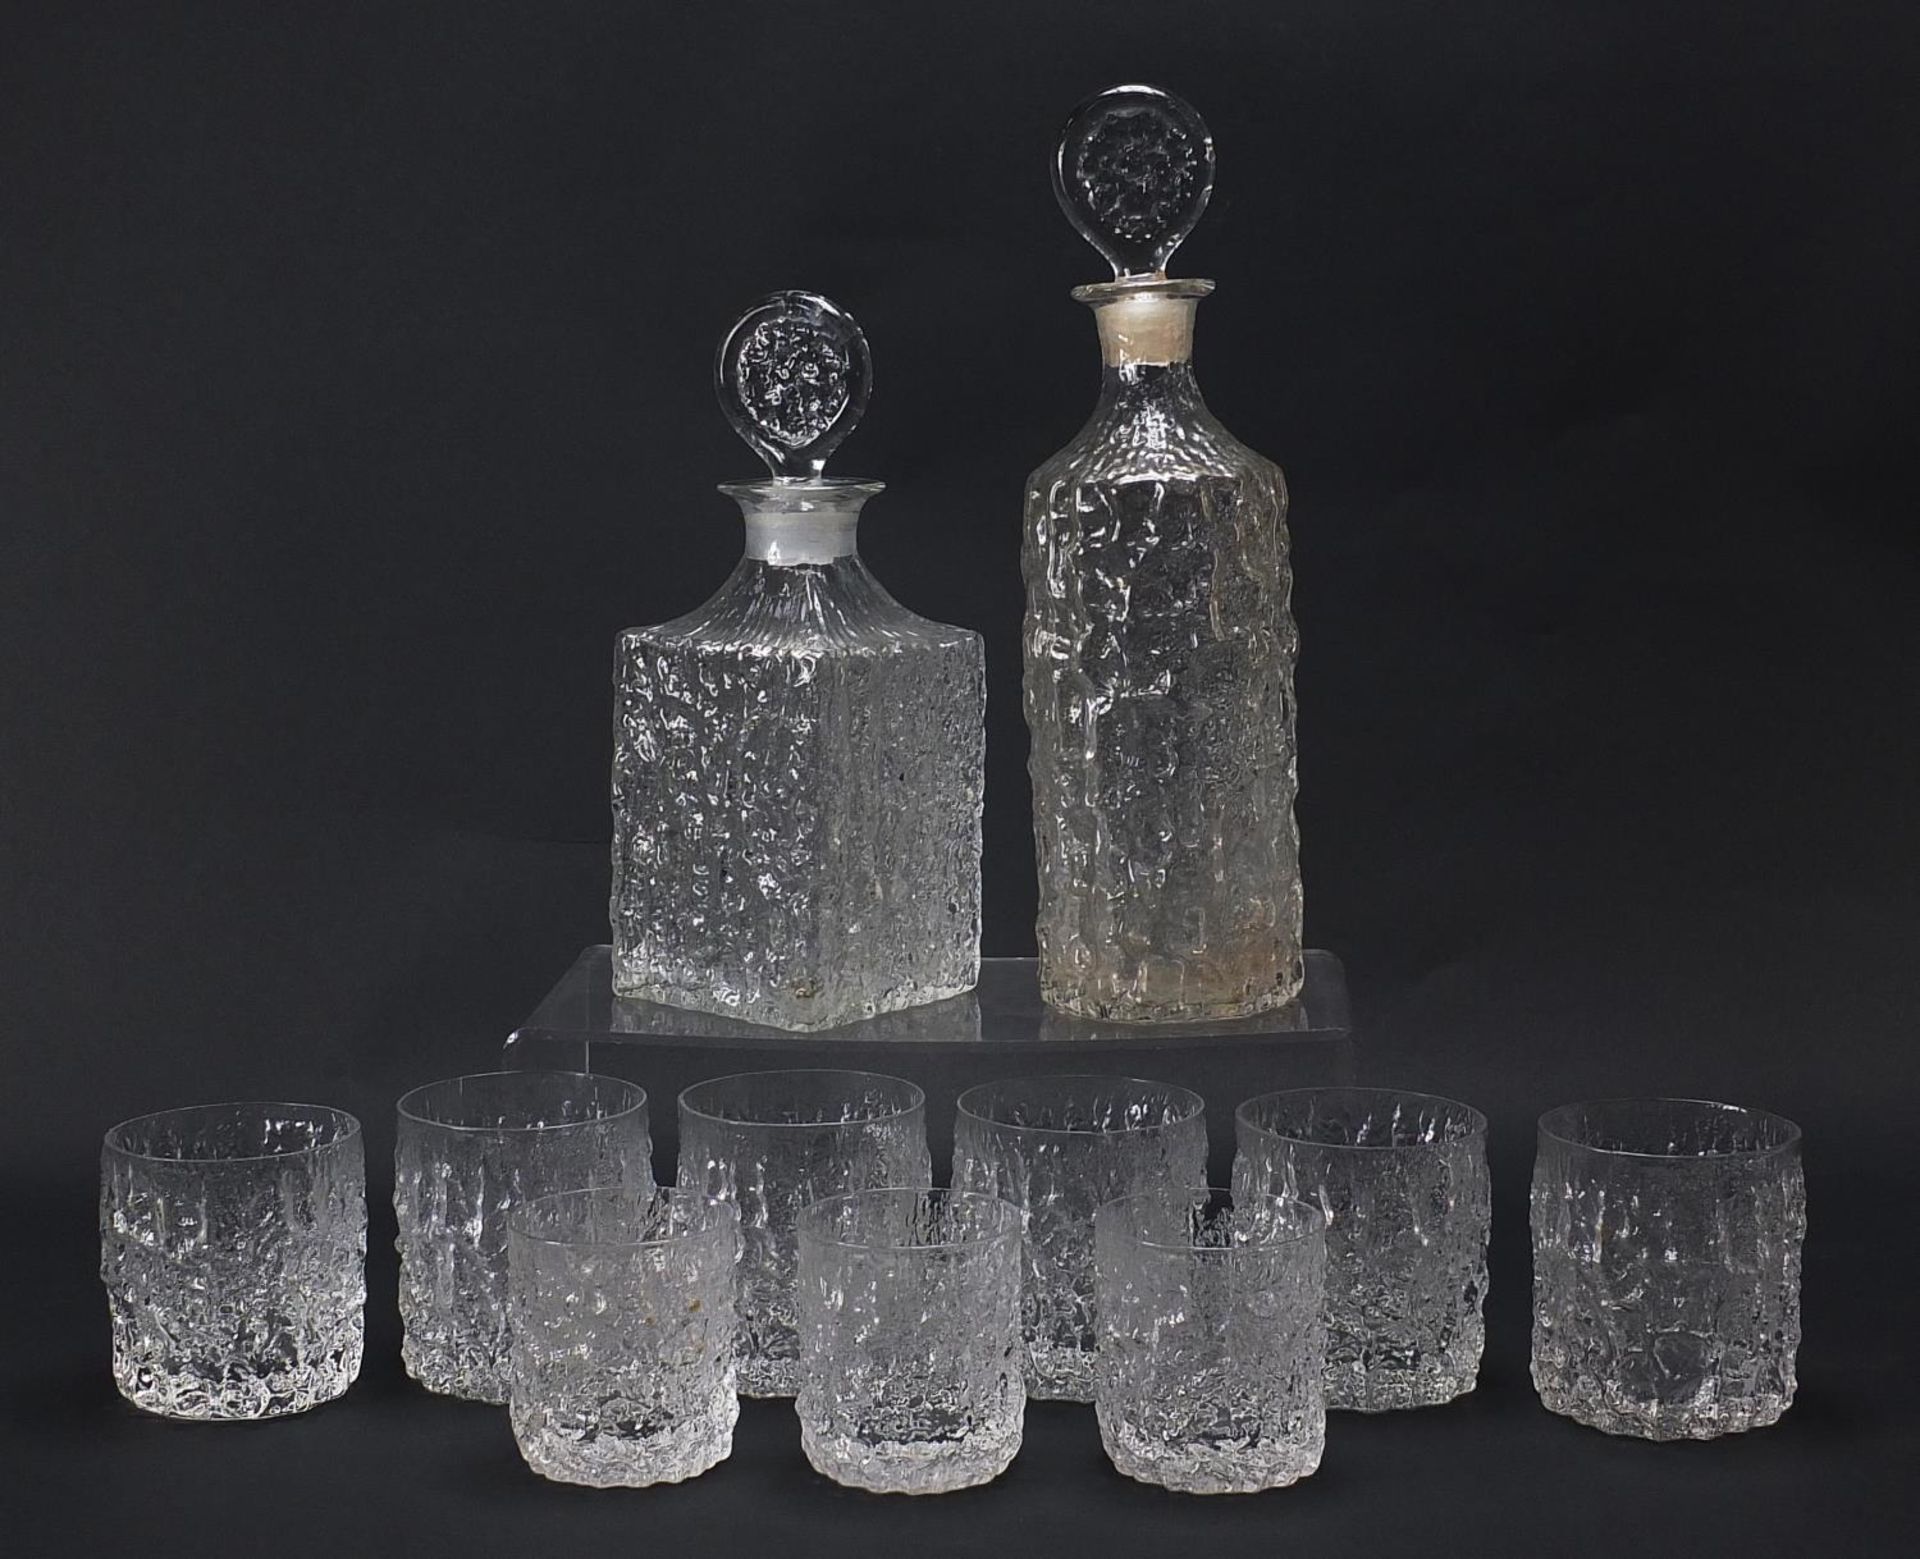 Geoffrey Baxter for Whitefriars, textured glassware comprising two decanters, set of six tumbles and - Image 4 of 4